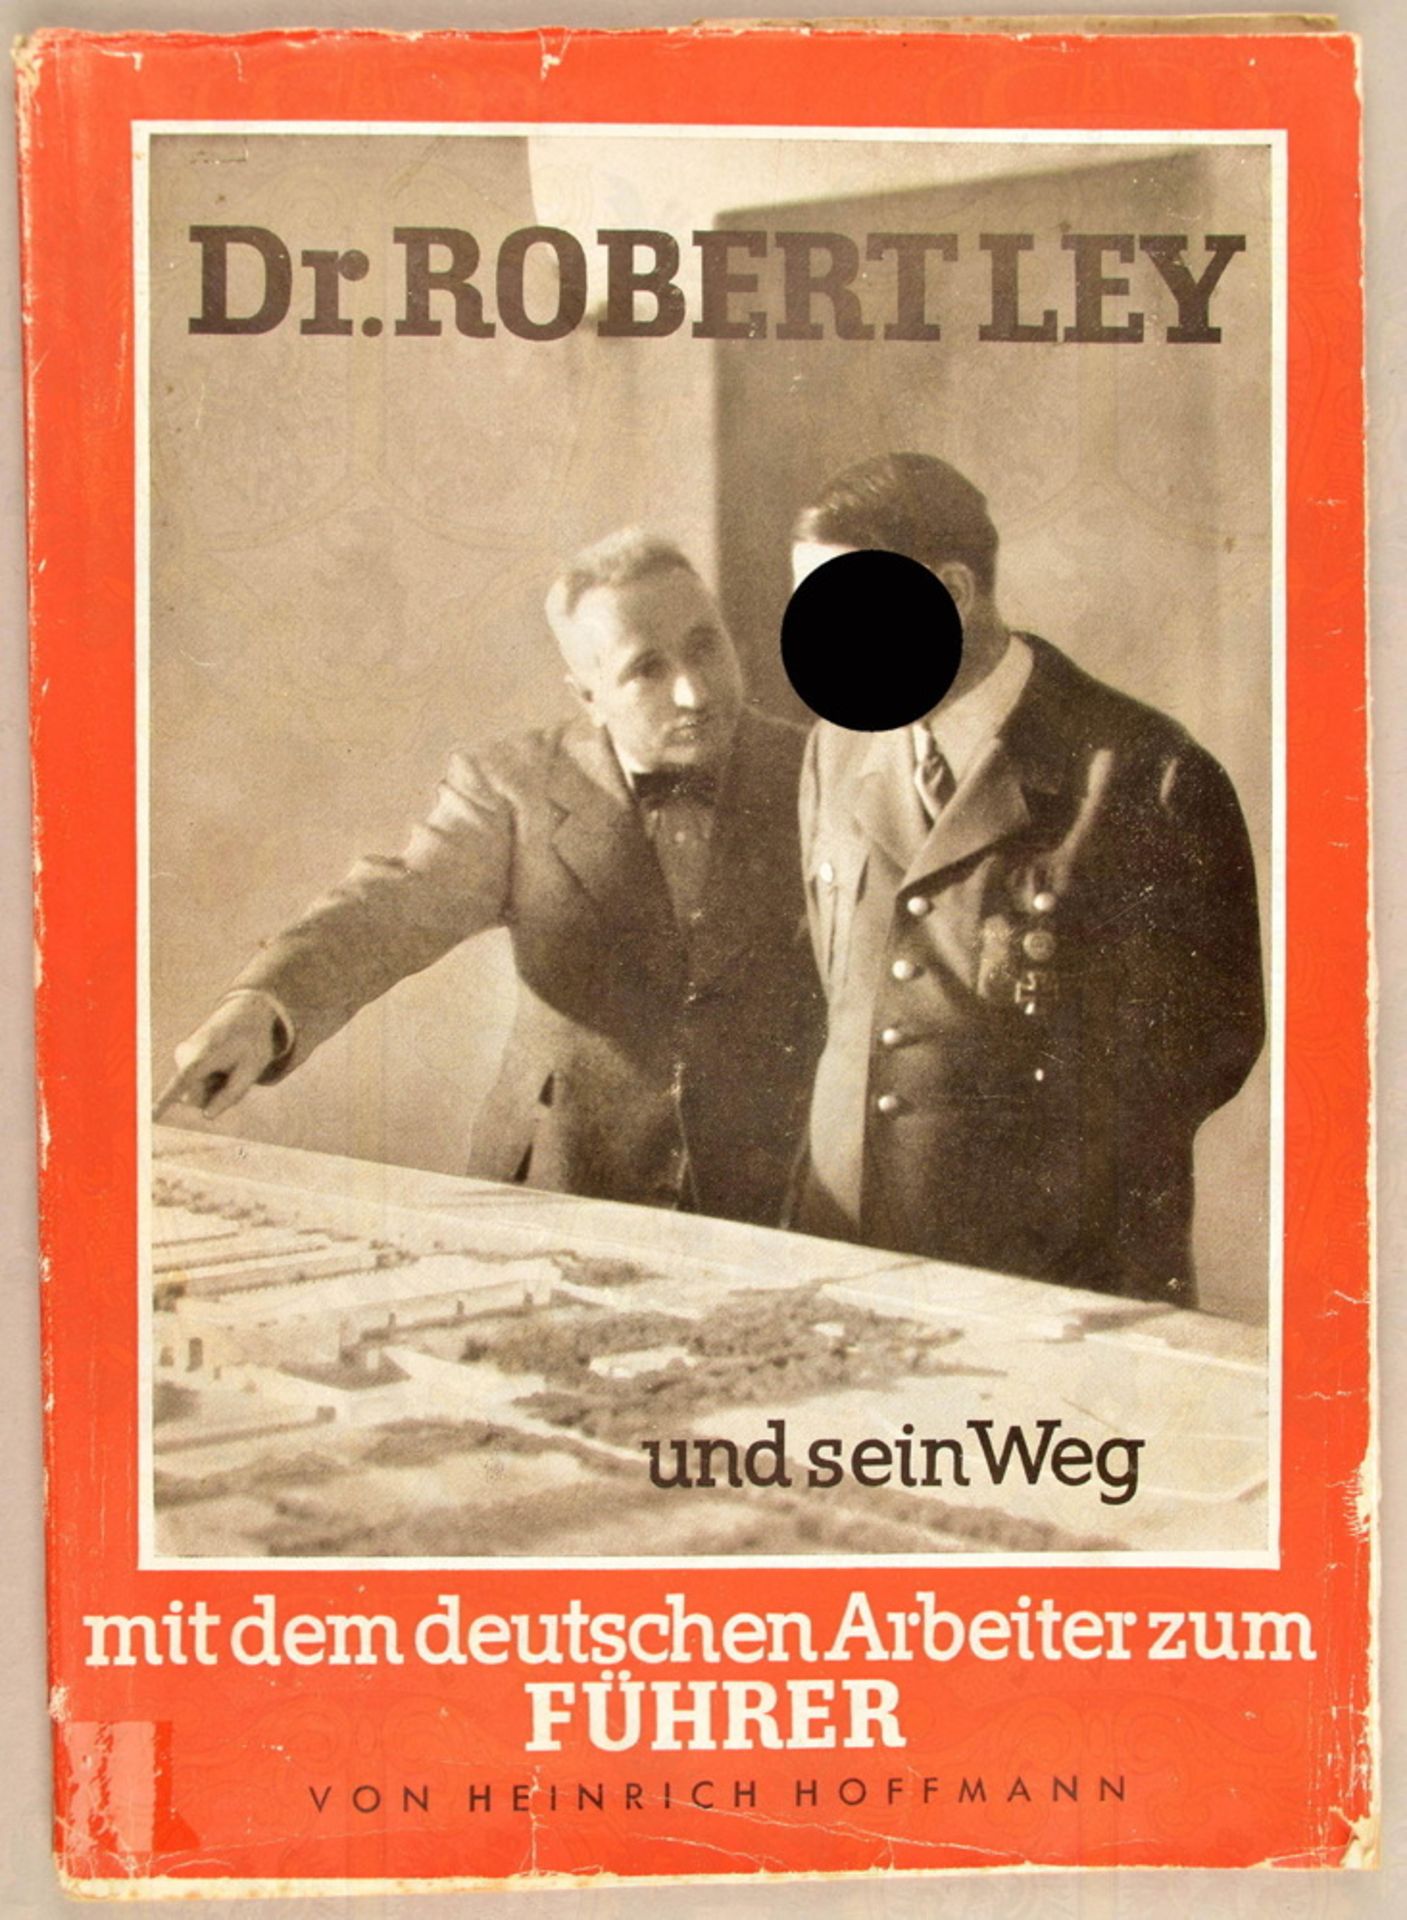 Illustrated book Dr Robert Ley and the German worker 1940